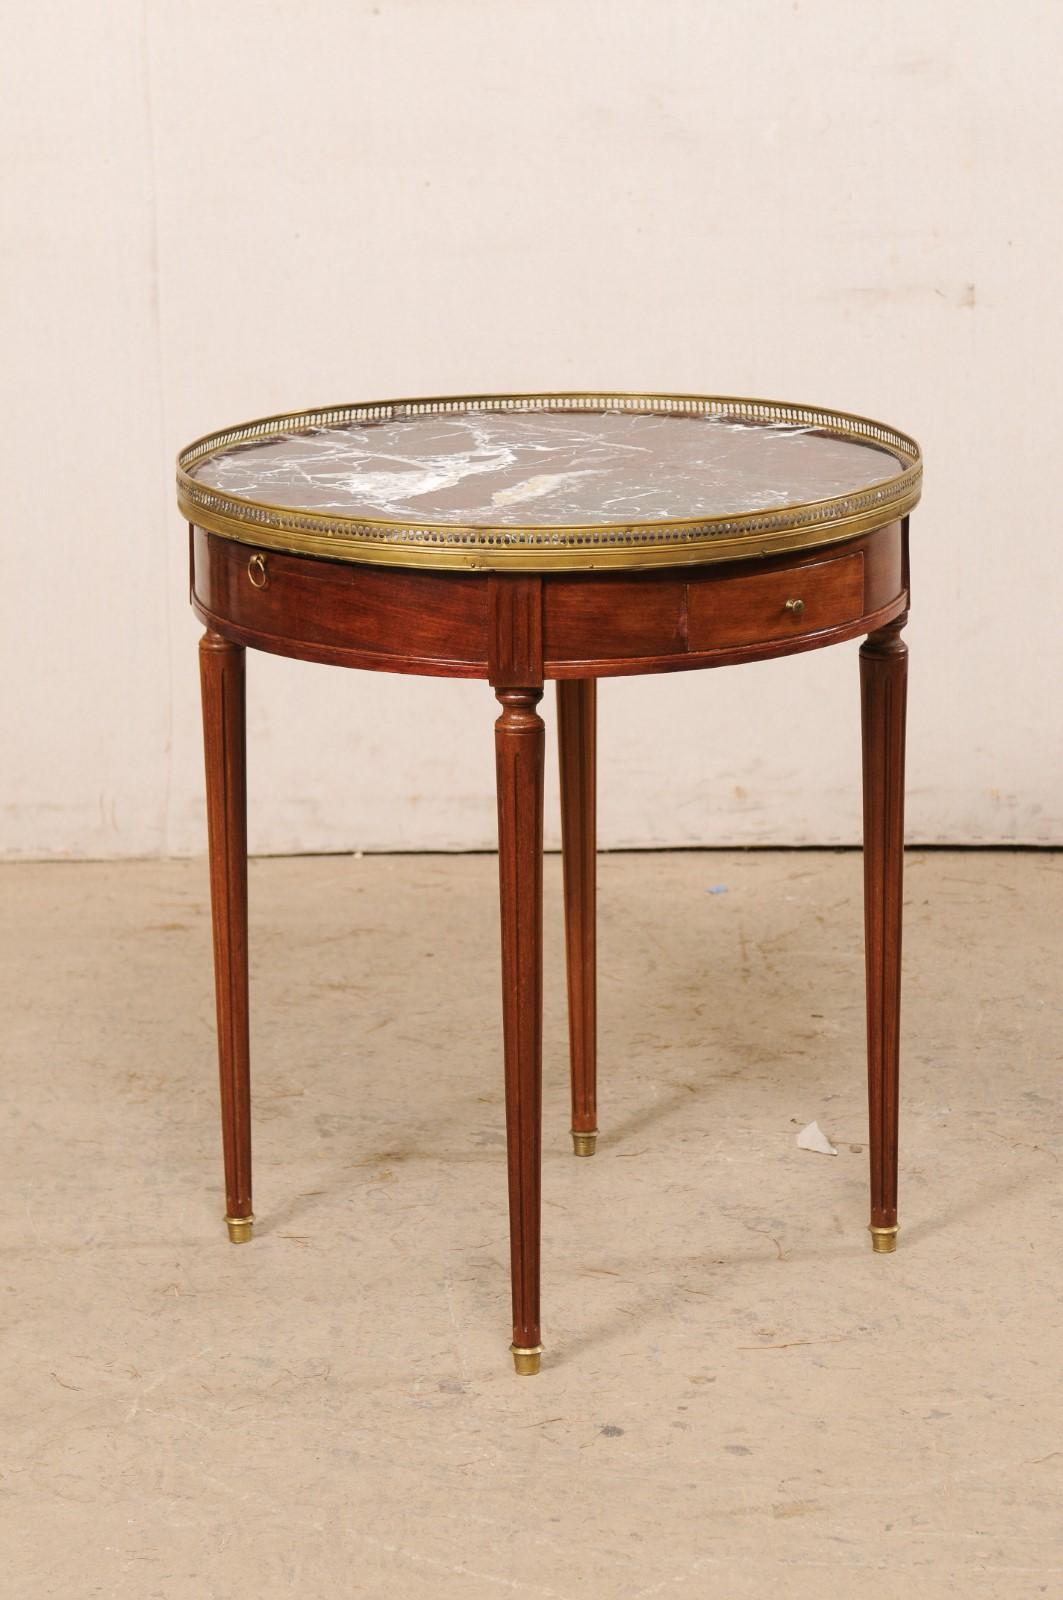 French Antique Round Cherry Wood Table W/Marble Top & Brass Gallery and Feet For Sale 3